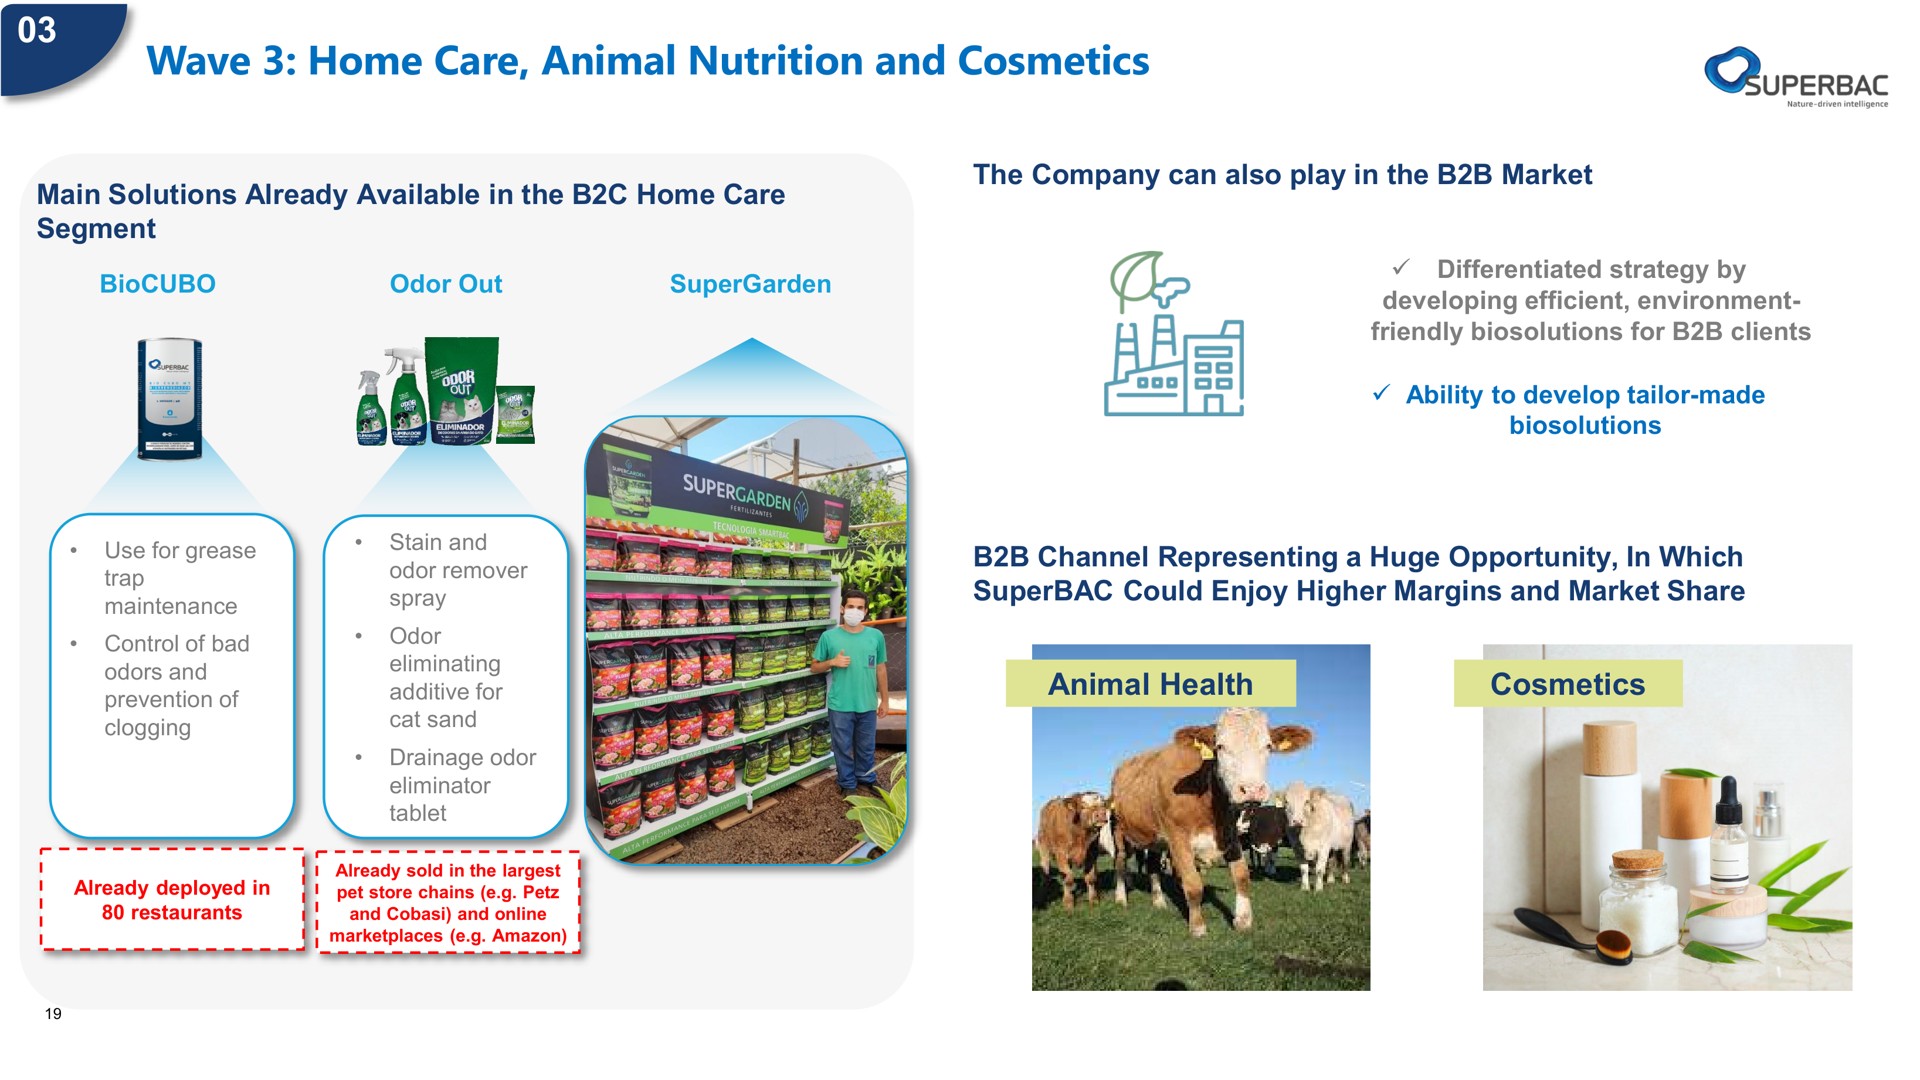 wave home care animal nutrition and cosmetics | Superbac